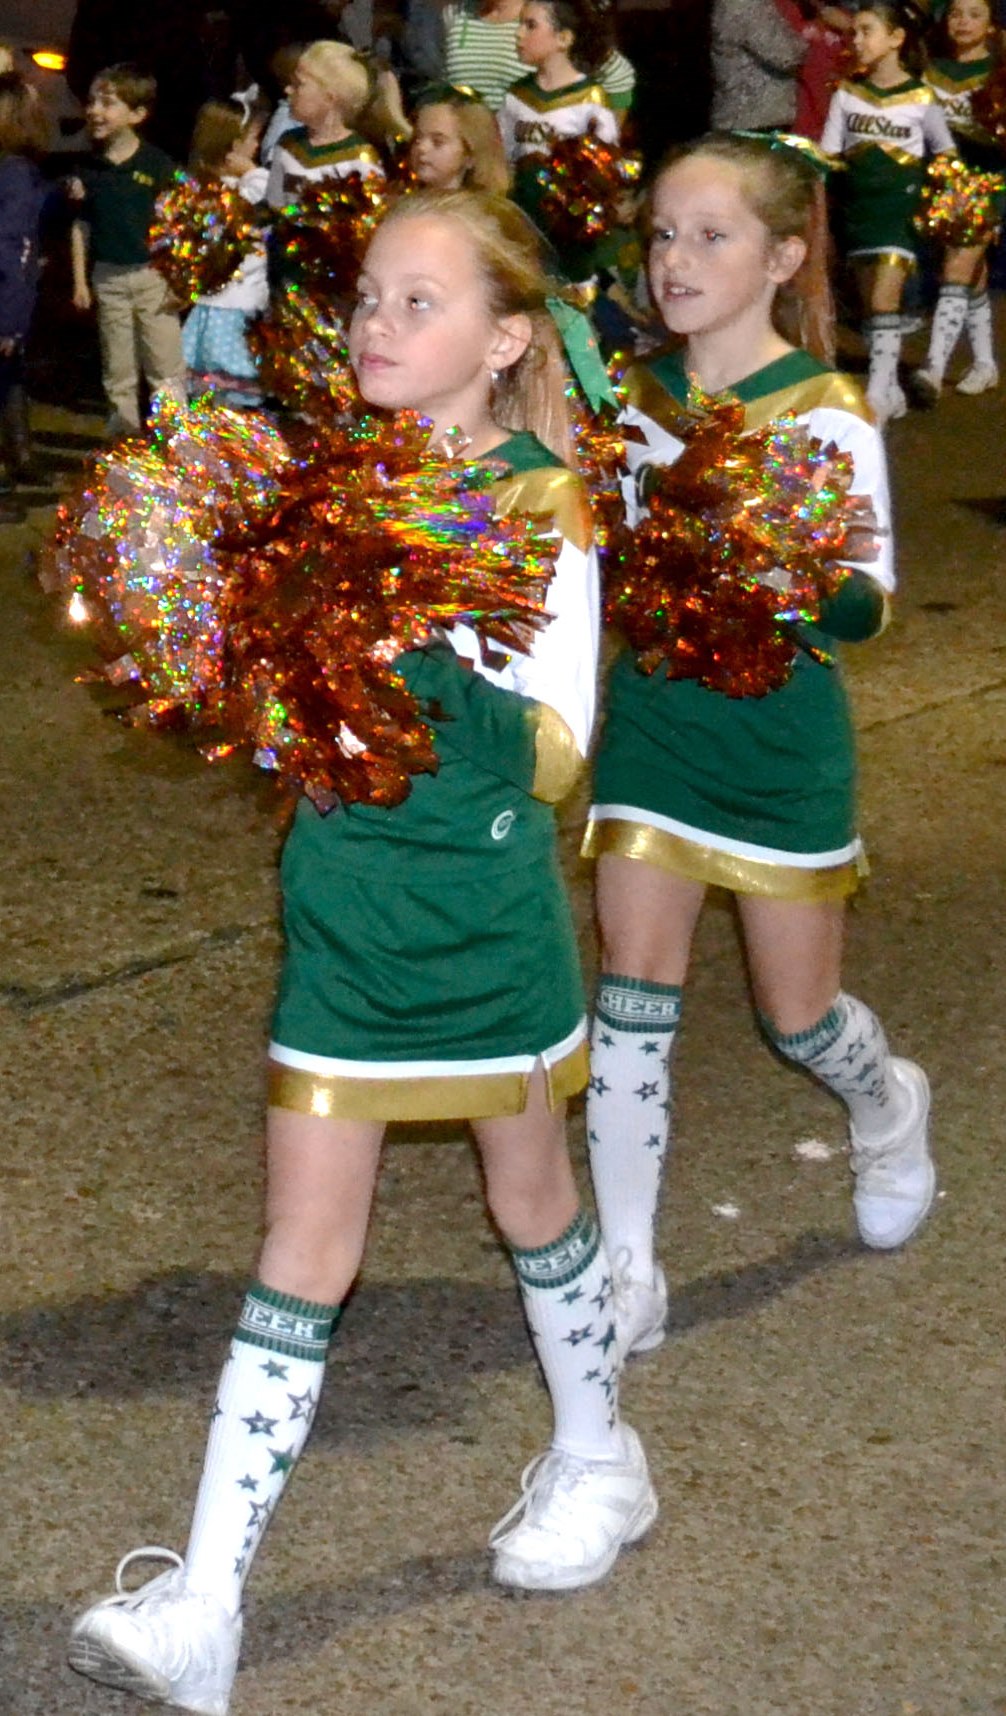 Delta All-State Recreational Cheer squad performed during events like the Cleveland Christmas Parade this past year. 